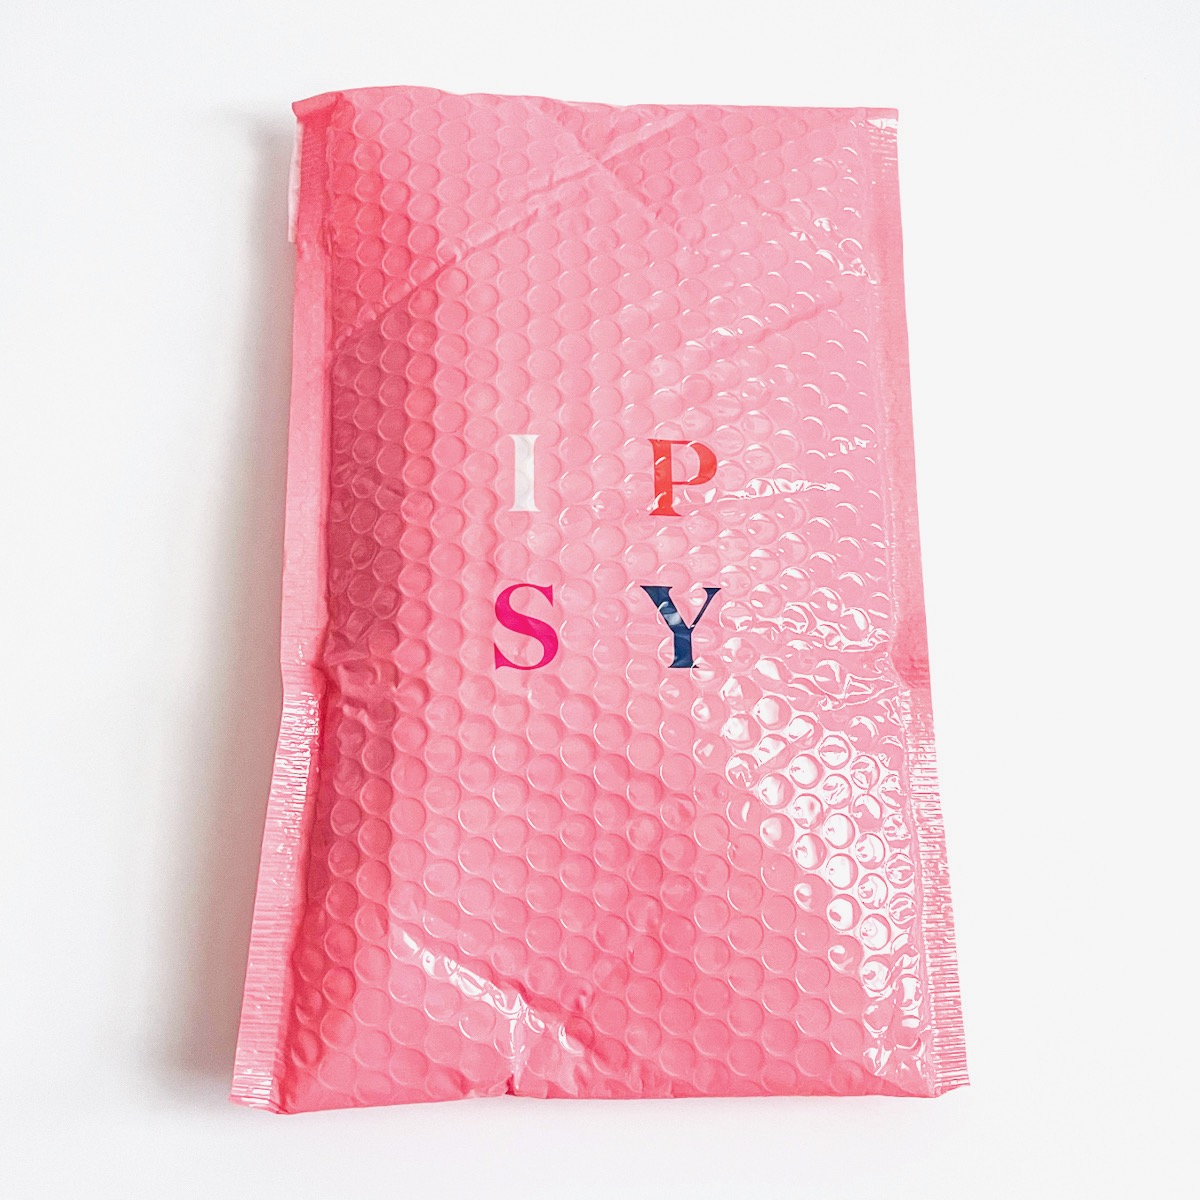 pink bubble mailer with Ipsy logo on white background